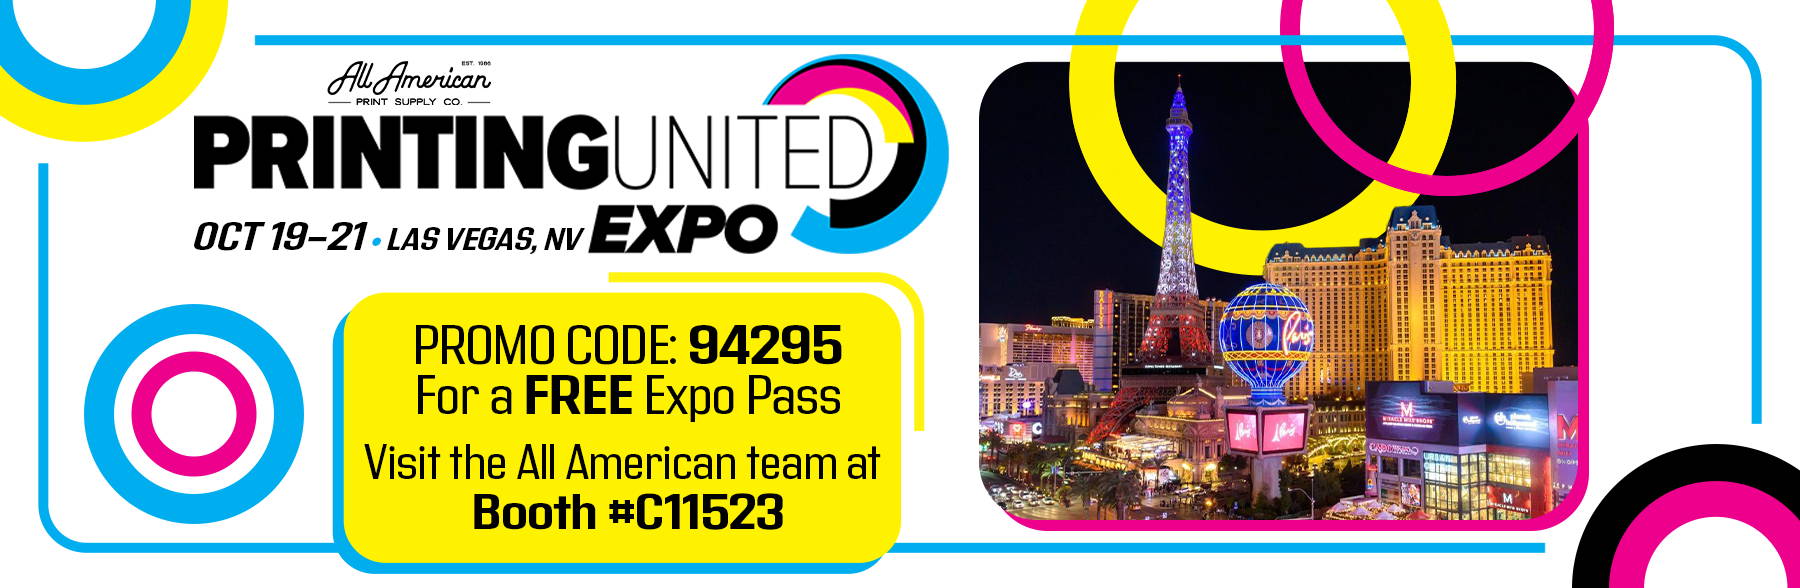 Printing united in las vegas with all american print supply co